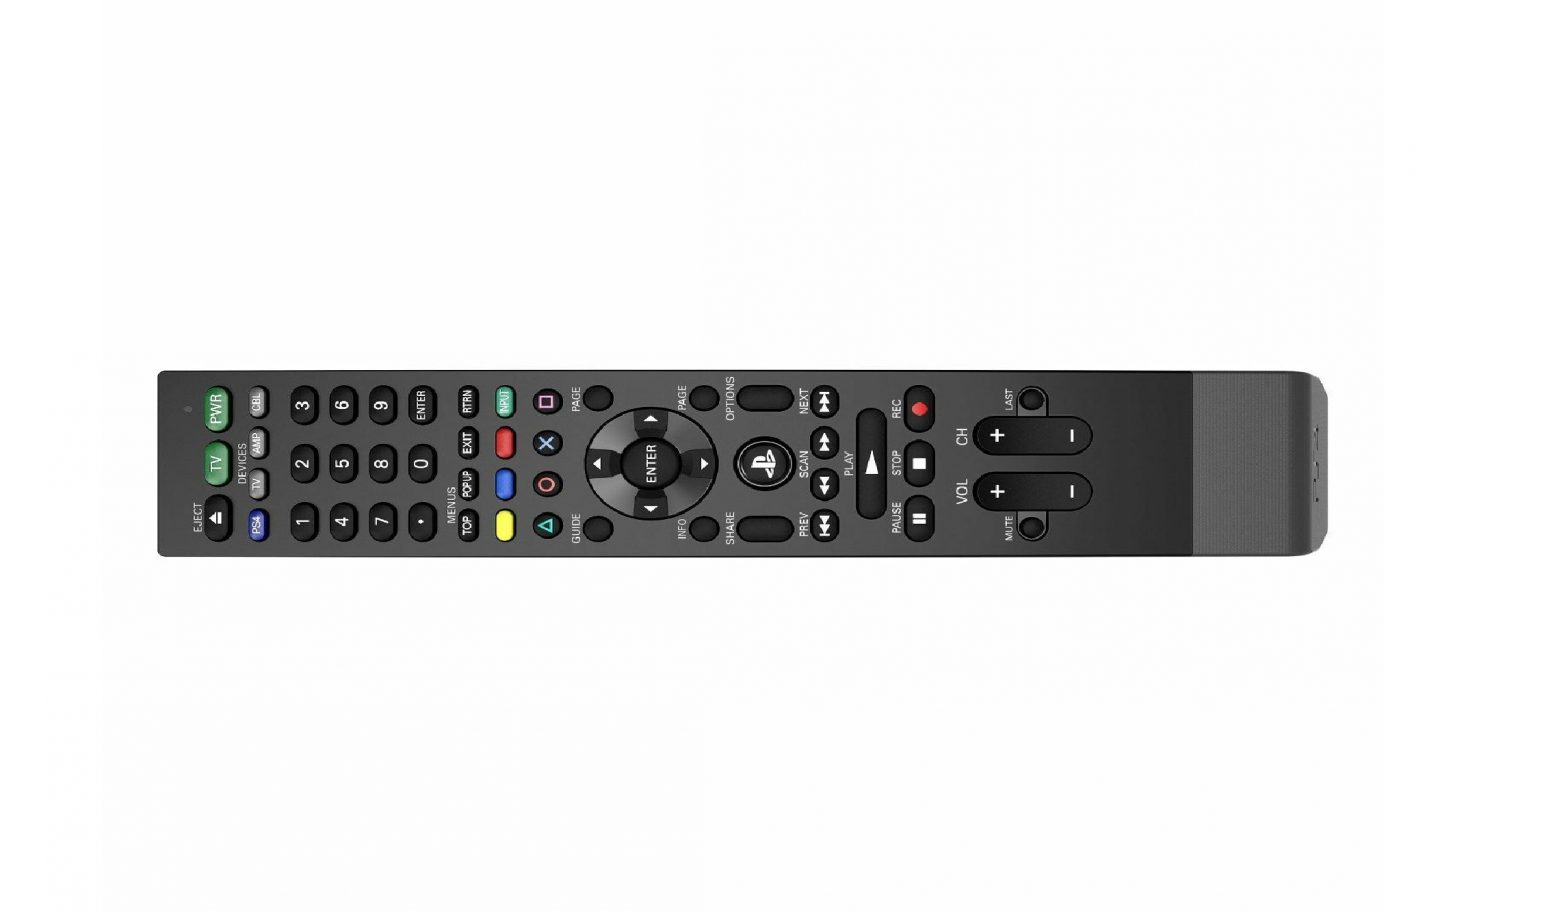 PDP Universal Media Remote for PlayStation 4 Instruction Manual